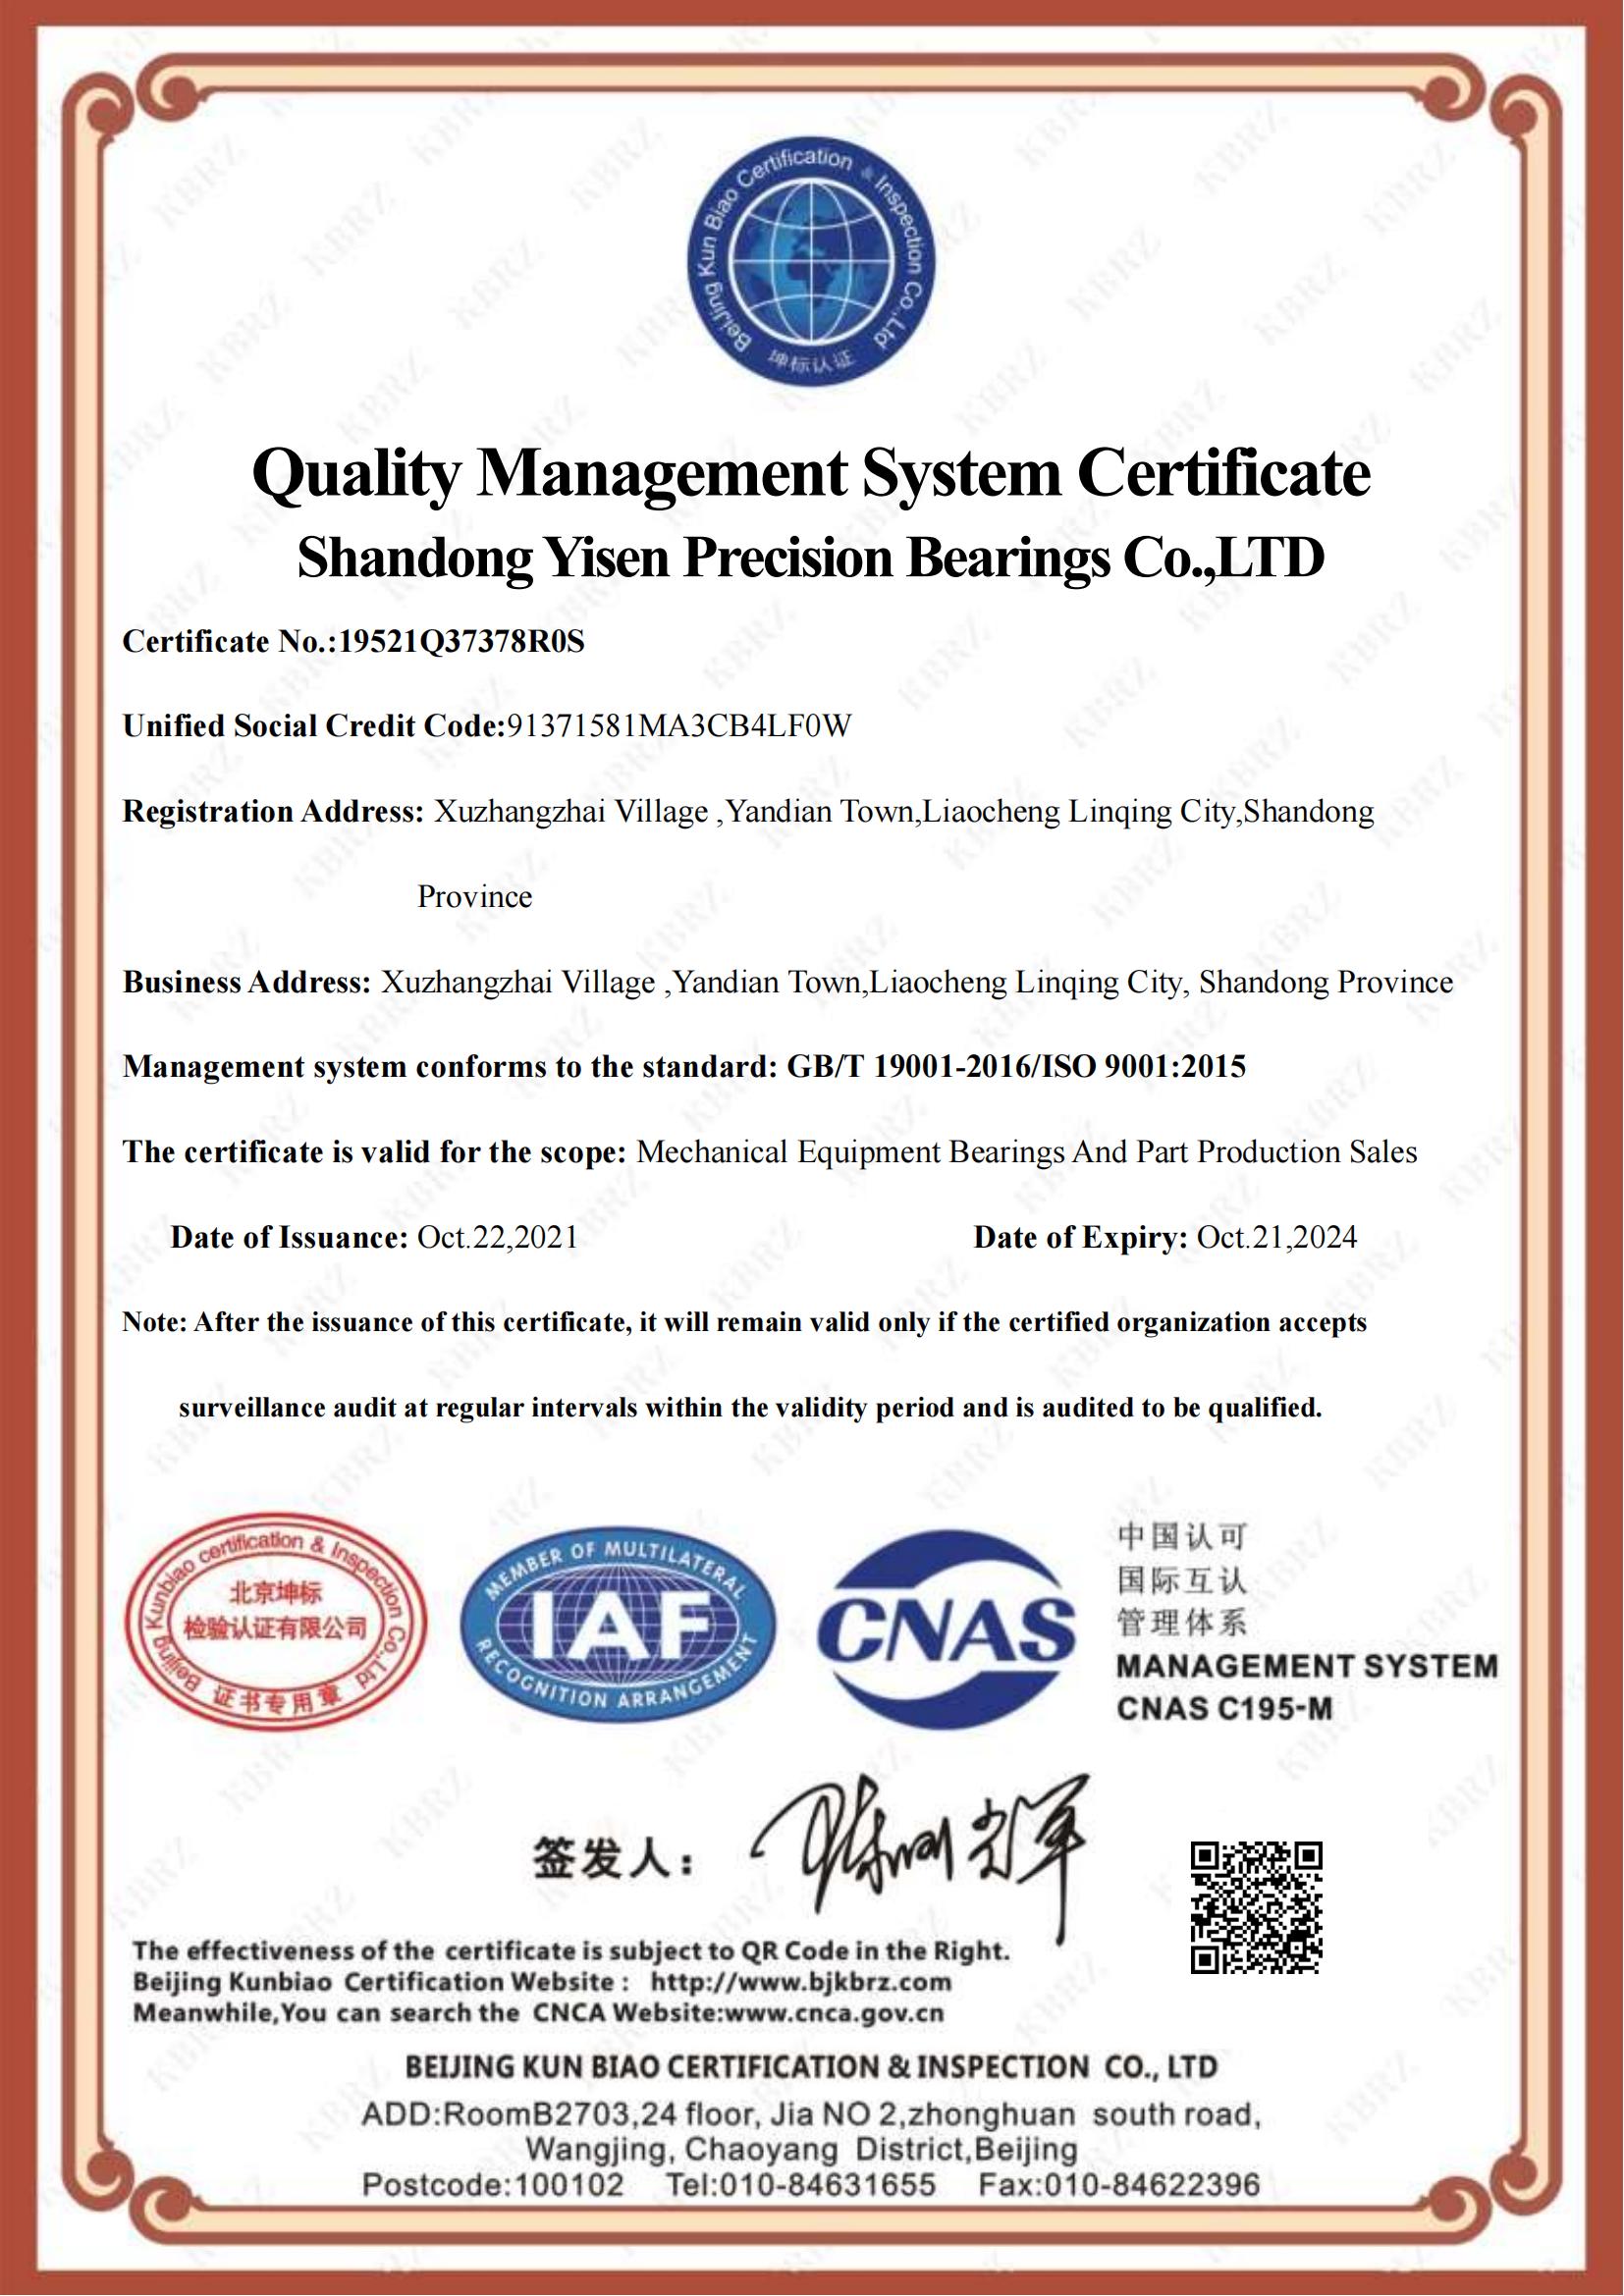 SRBF bearing quality management system certificate